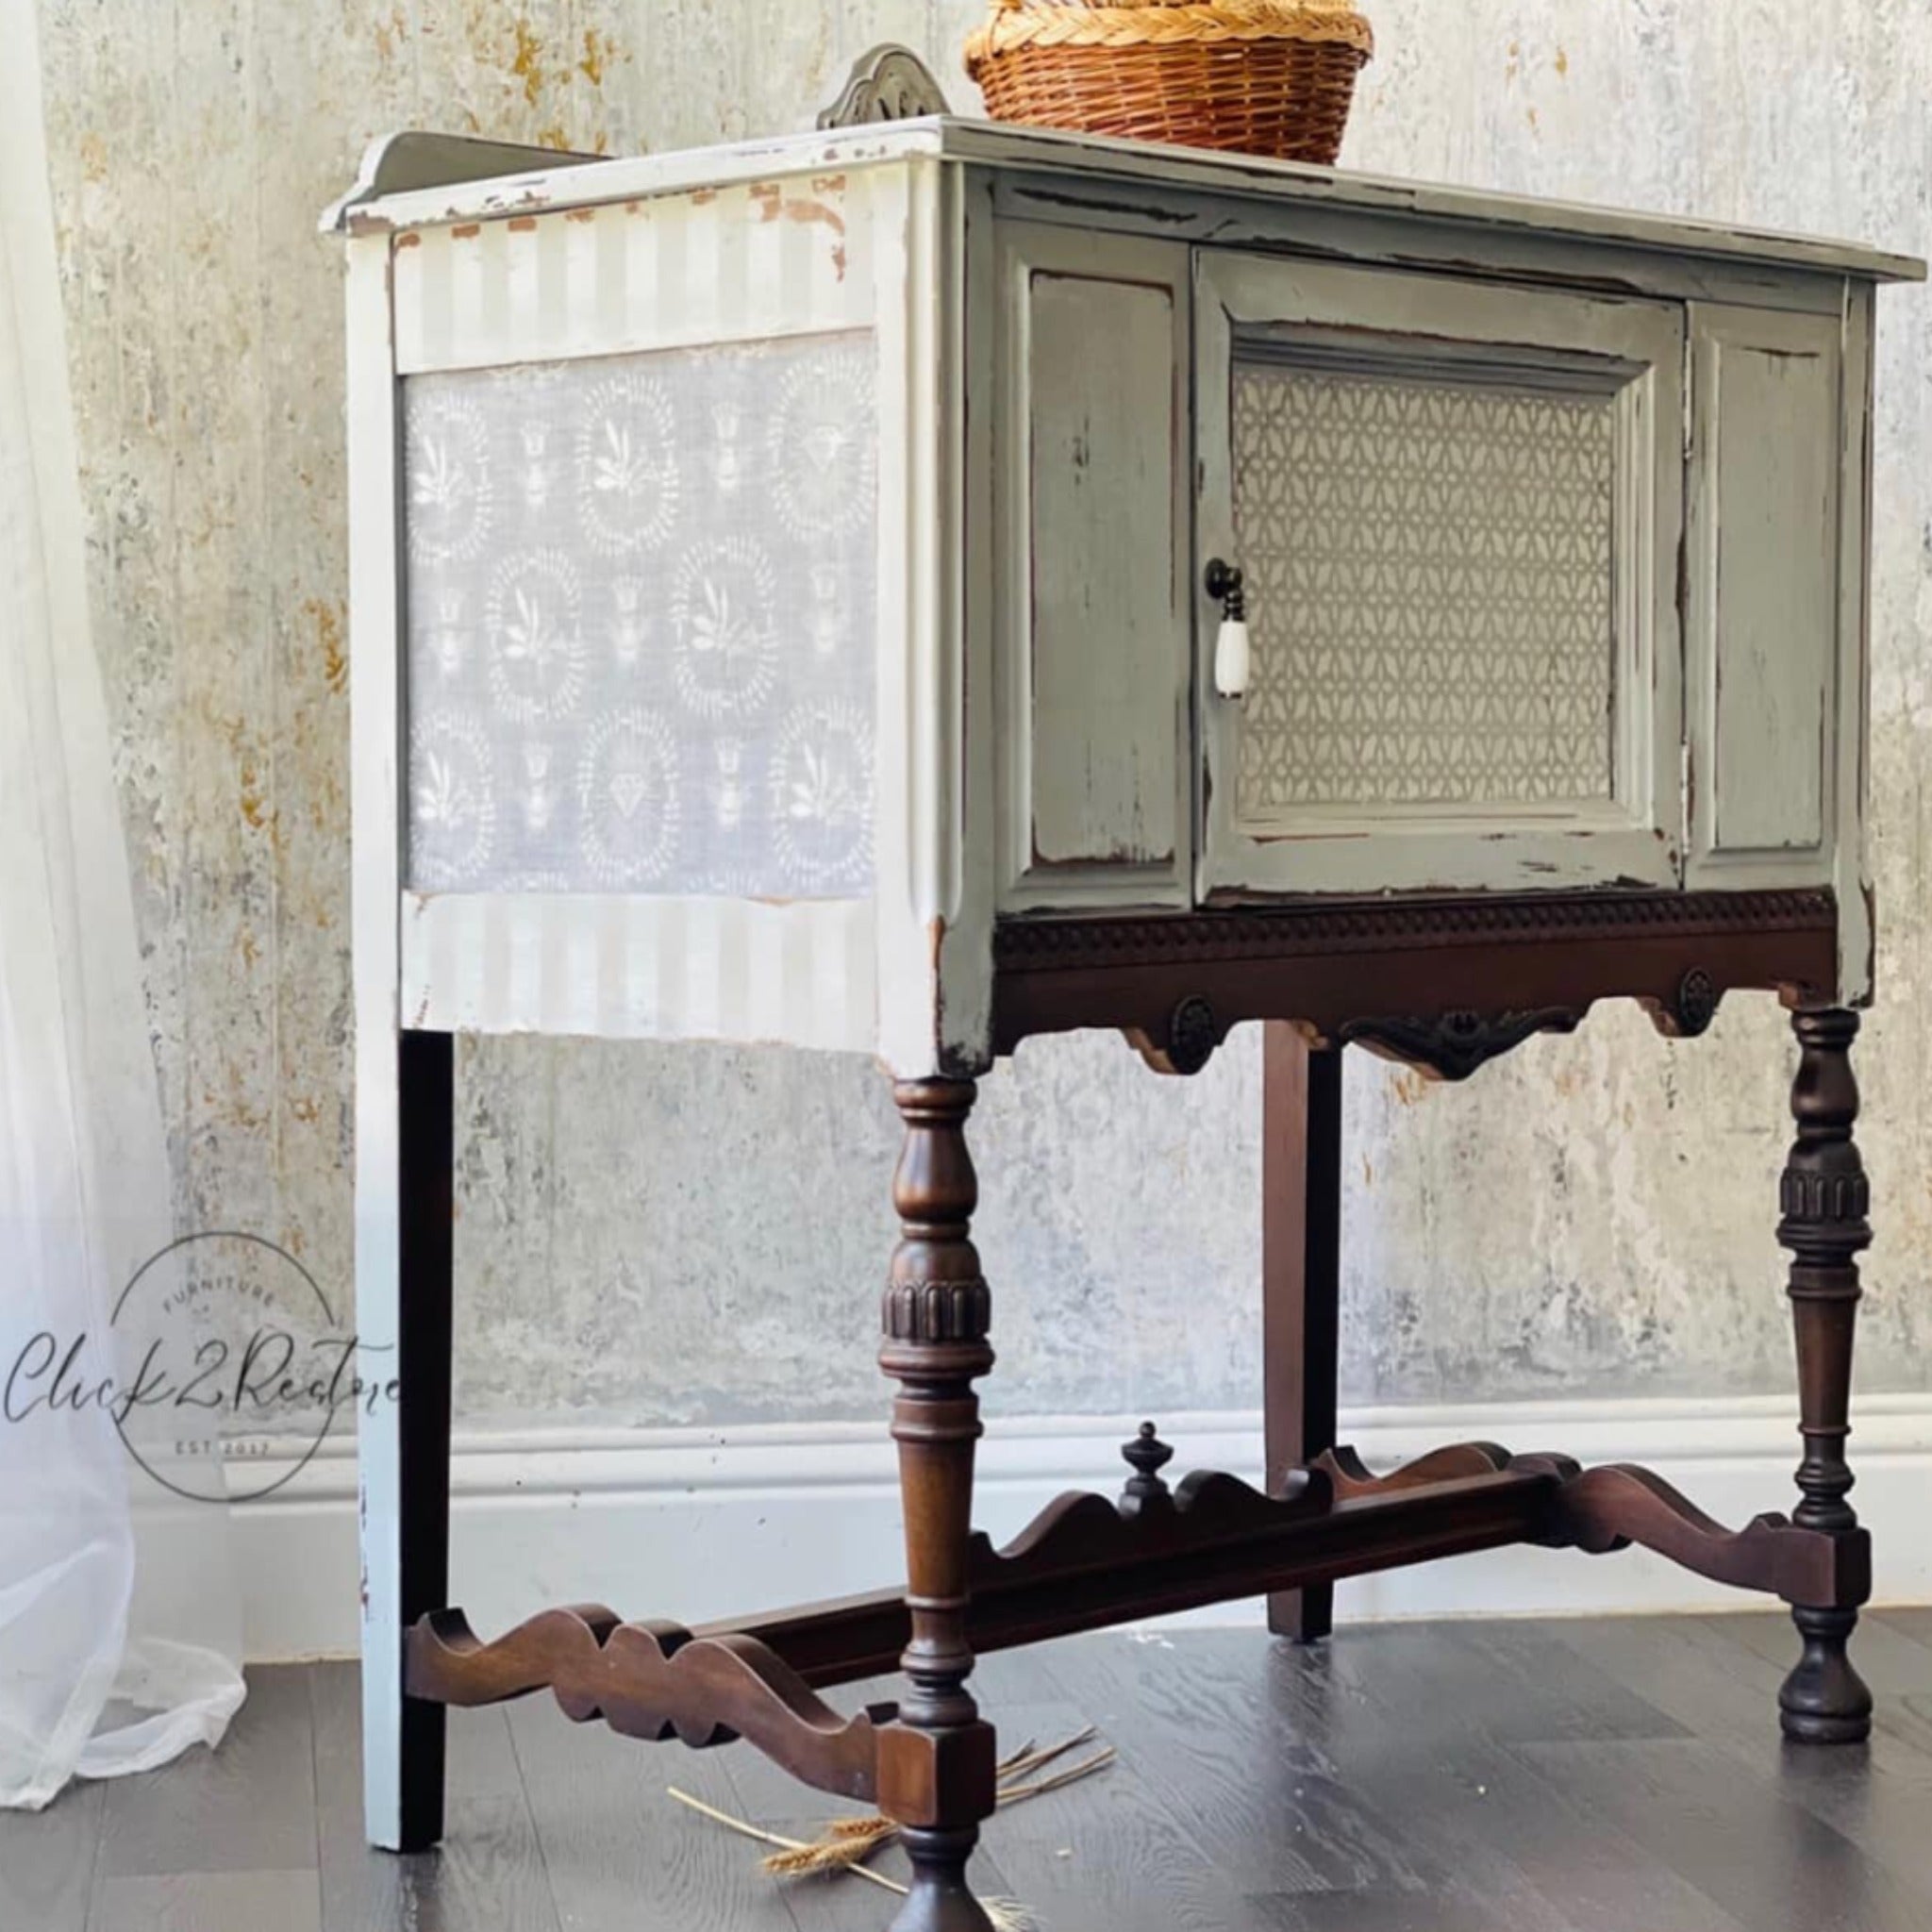 A vintage console table with storage refurbished by Click 2 Restore is painted antique white with brown legs and features ReDesign with Prima's Delicate Charm tissue paper on the side.